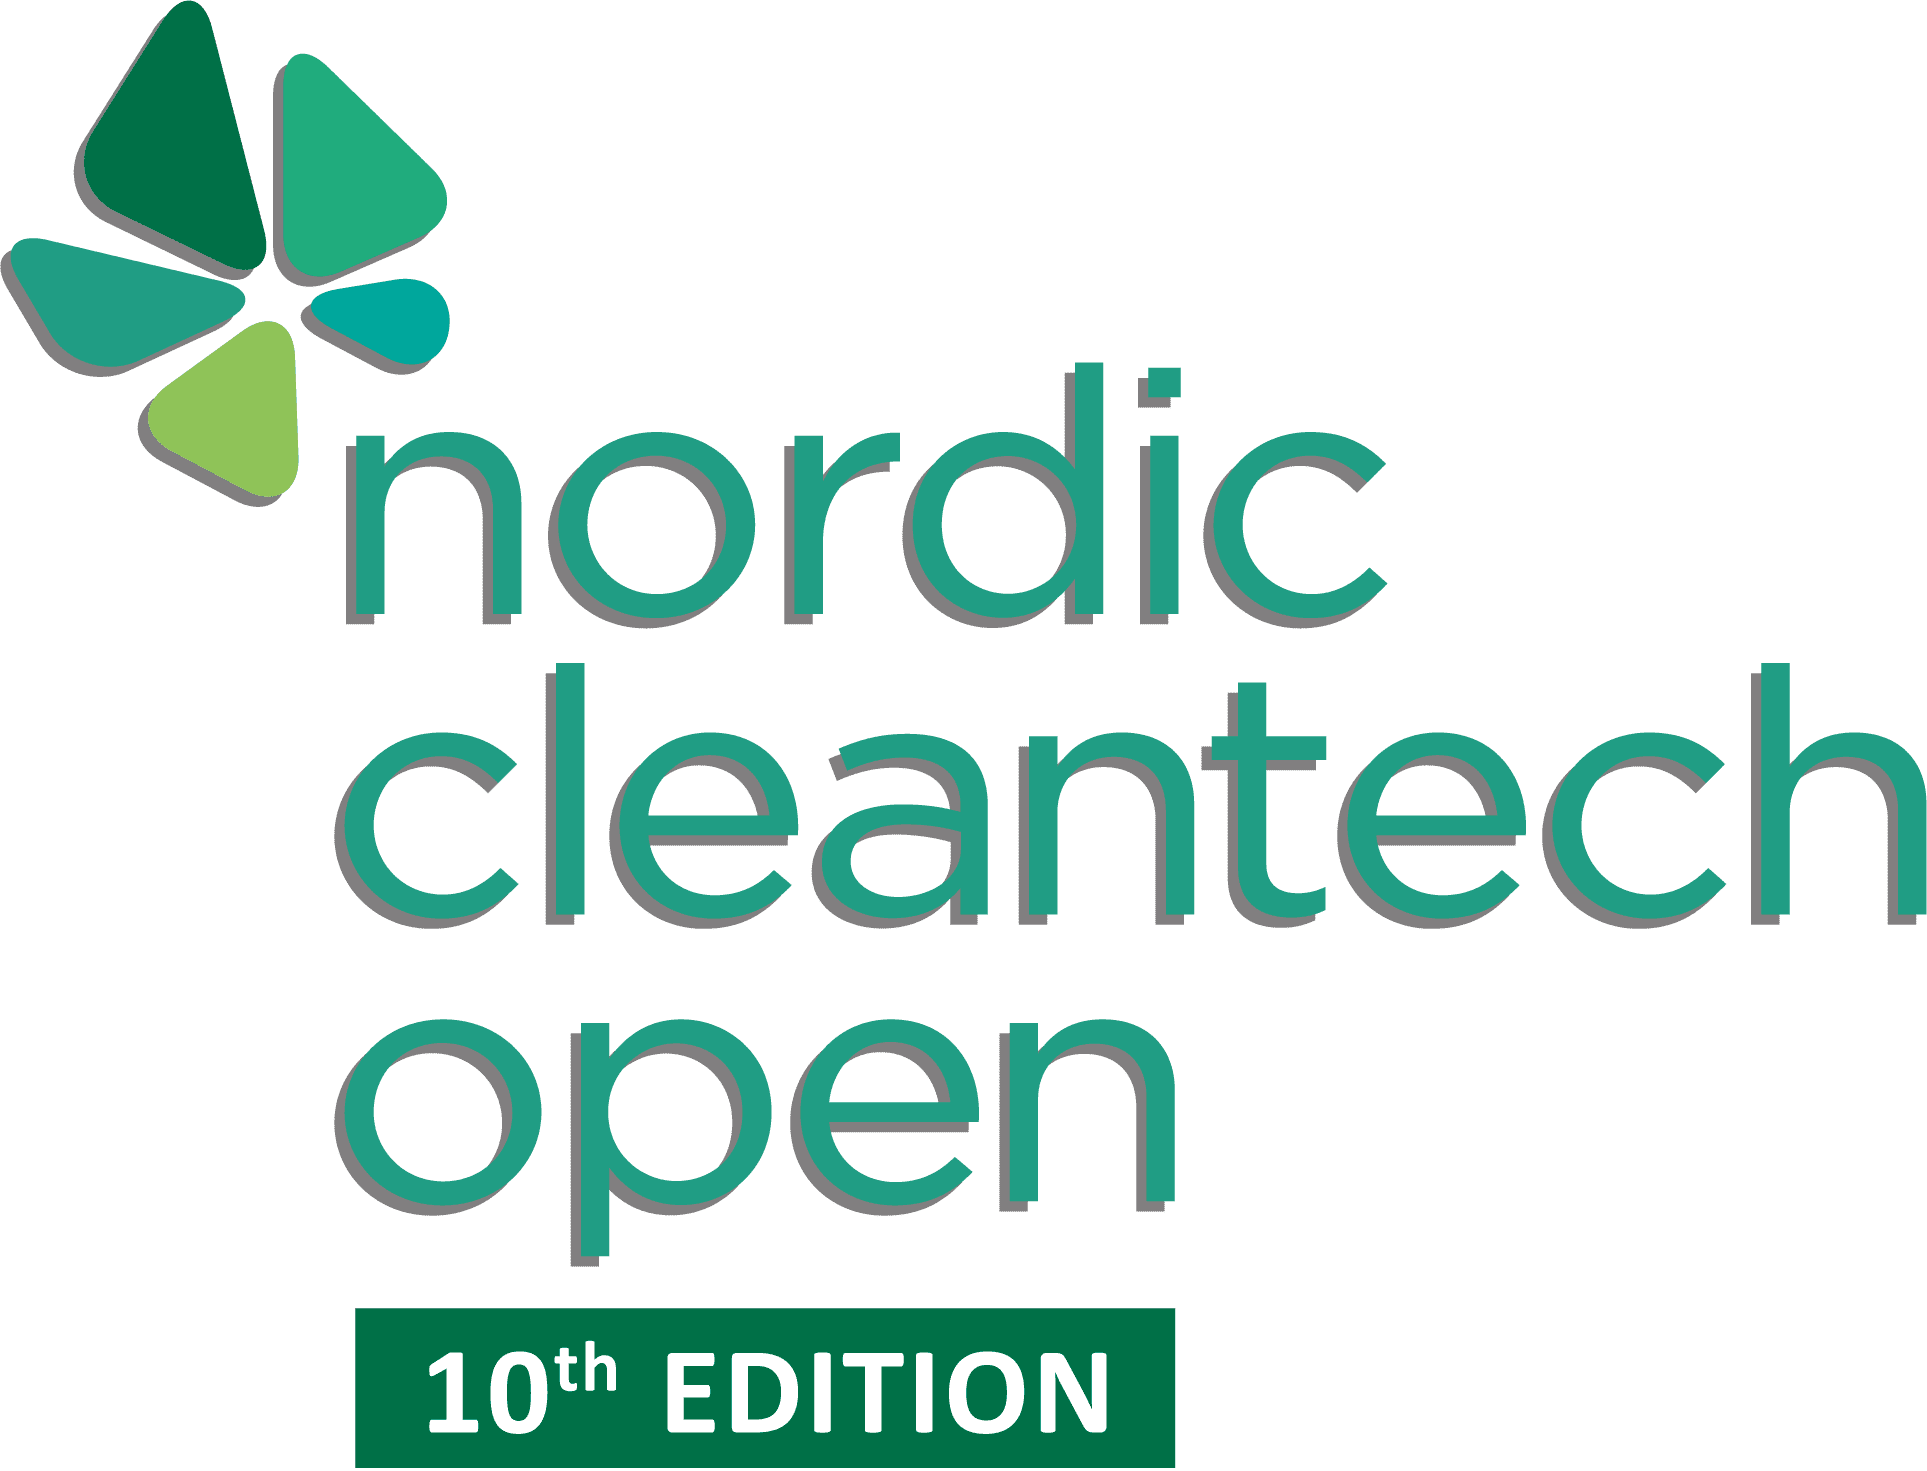 Nordic Cleantech Open - 10th Edition